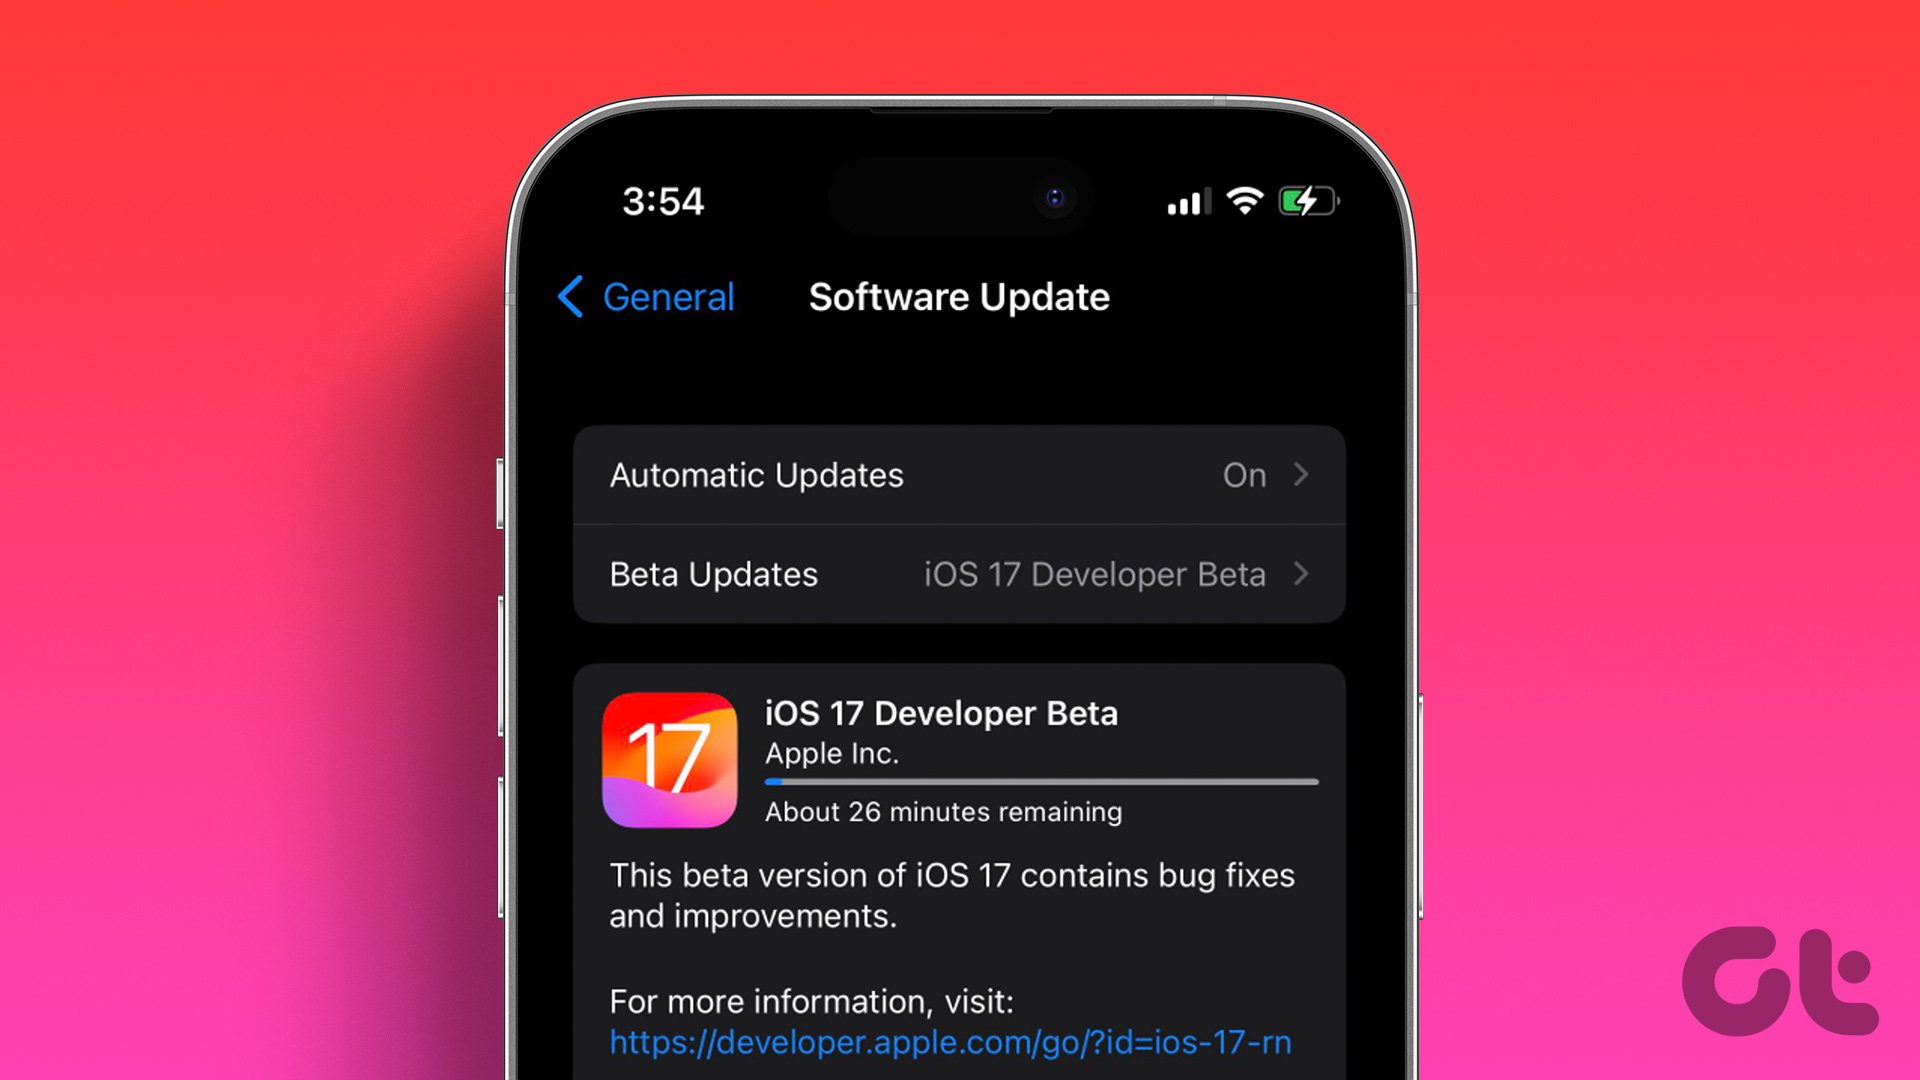 How to Officially Install iOS 17 Developer Beta for Free